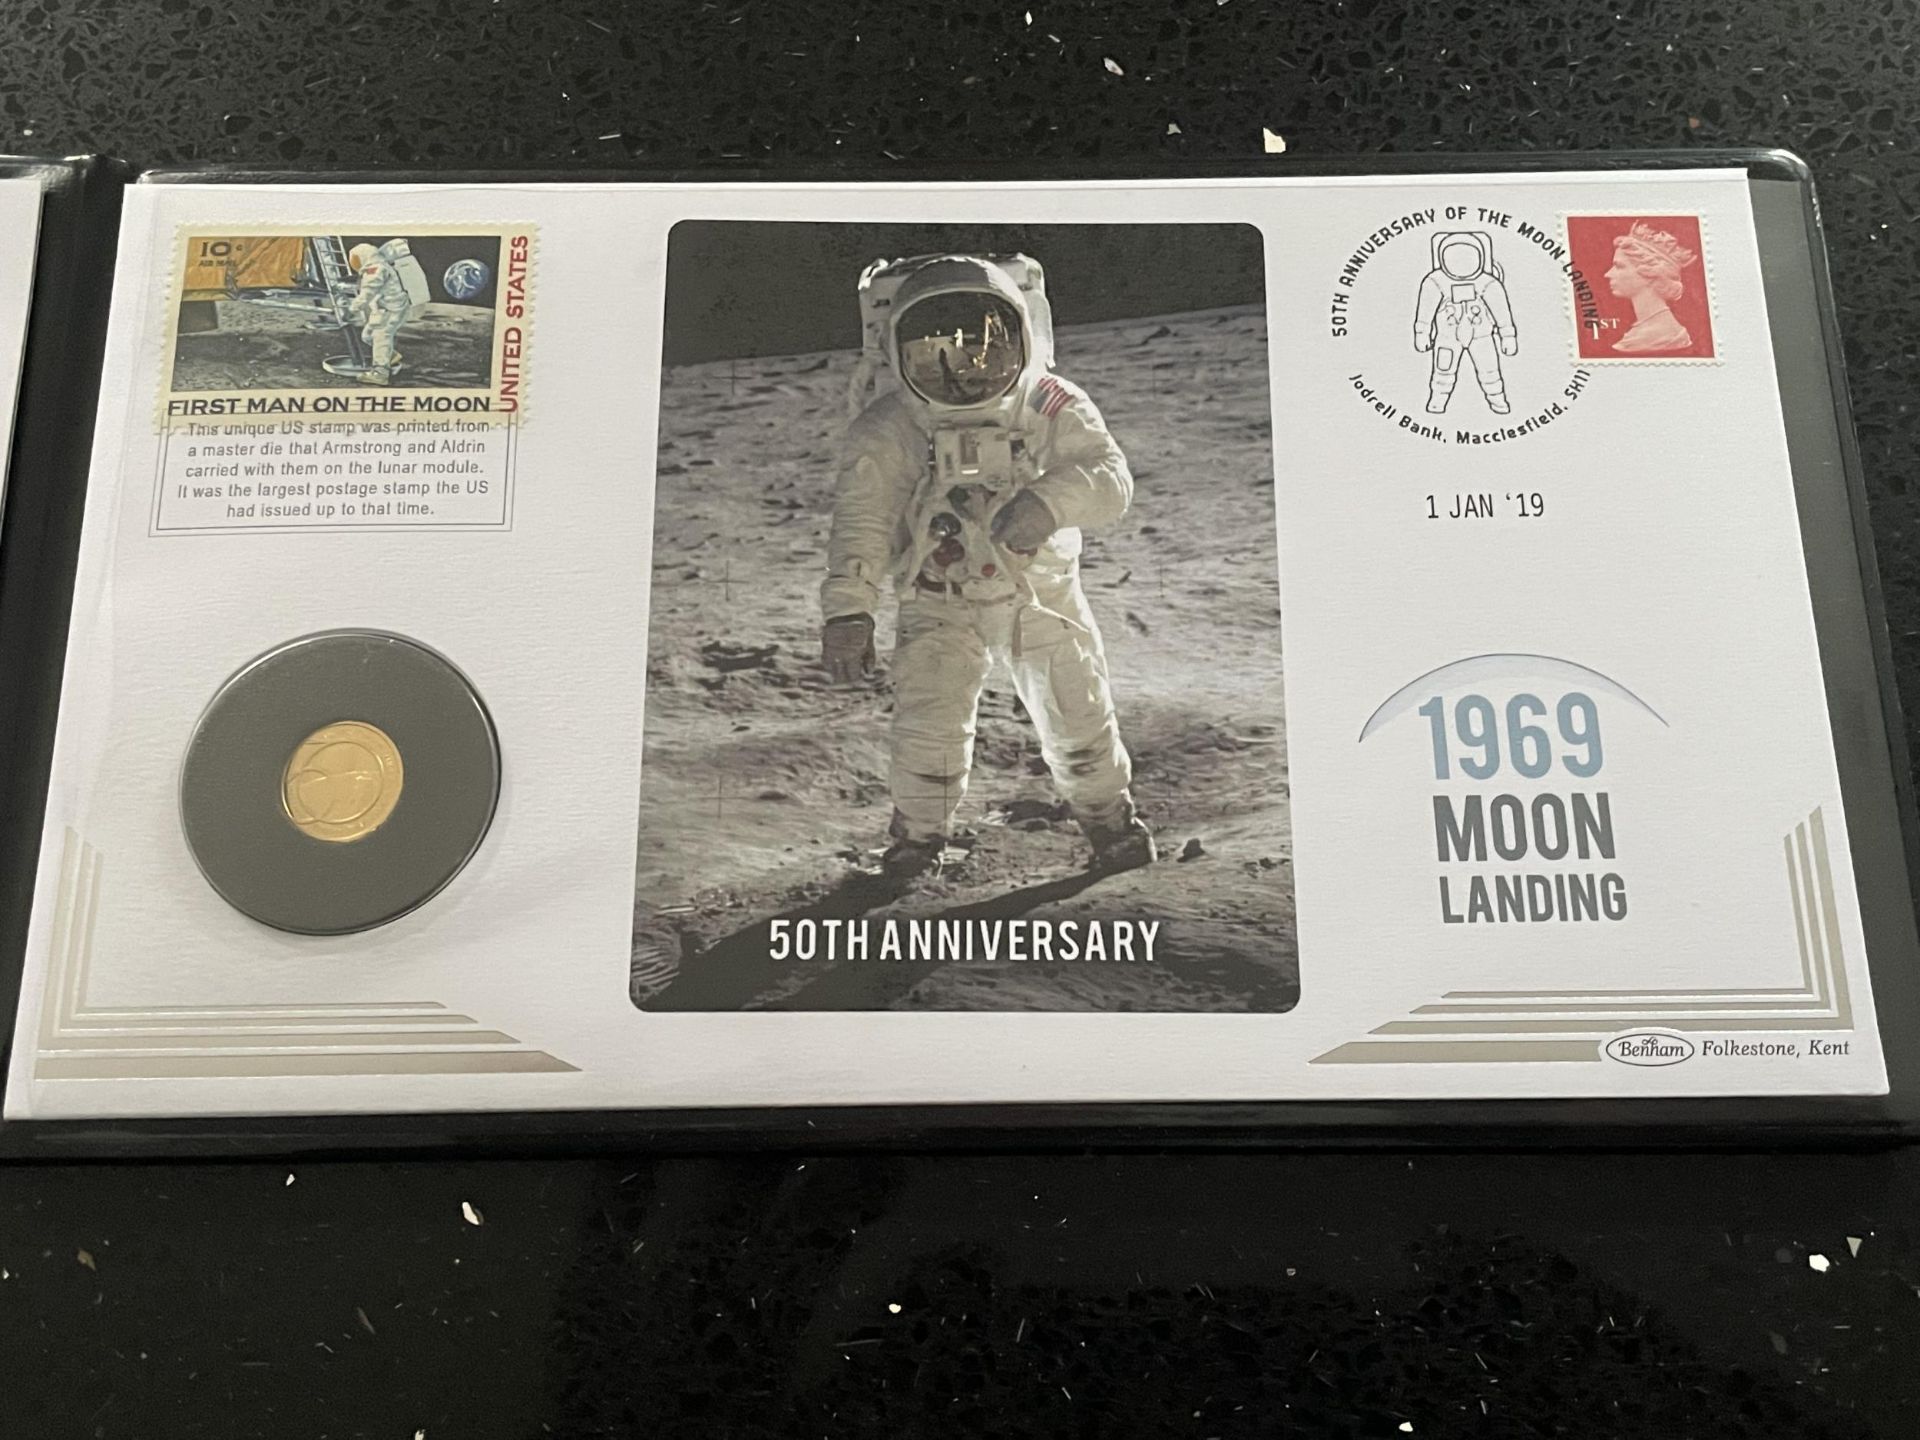 A 50TH ANNIVERSARY OF THE MOON LANDING 9 CARAT GOLD COMMEMORATIVE COIN COVER - LIMITED EDITION OF - Image 2 of 4